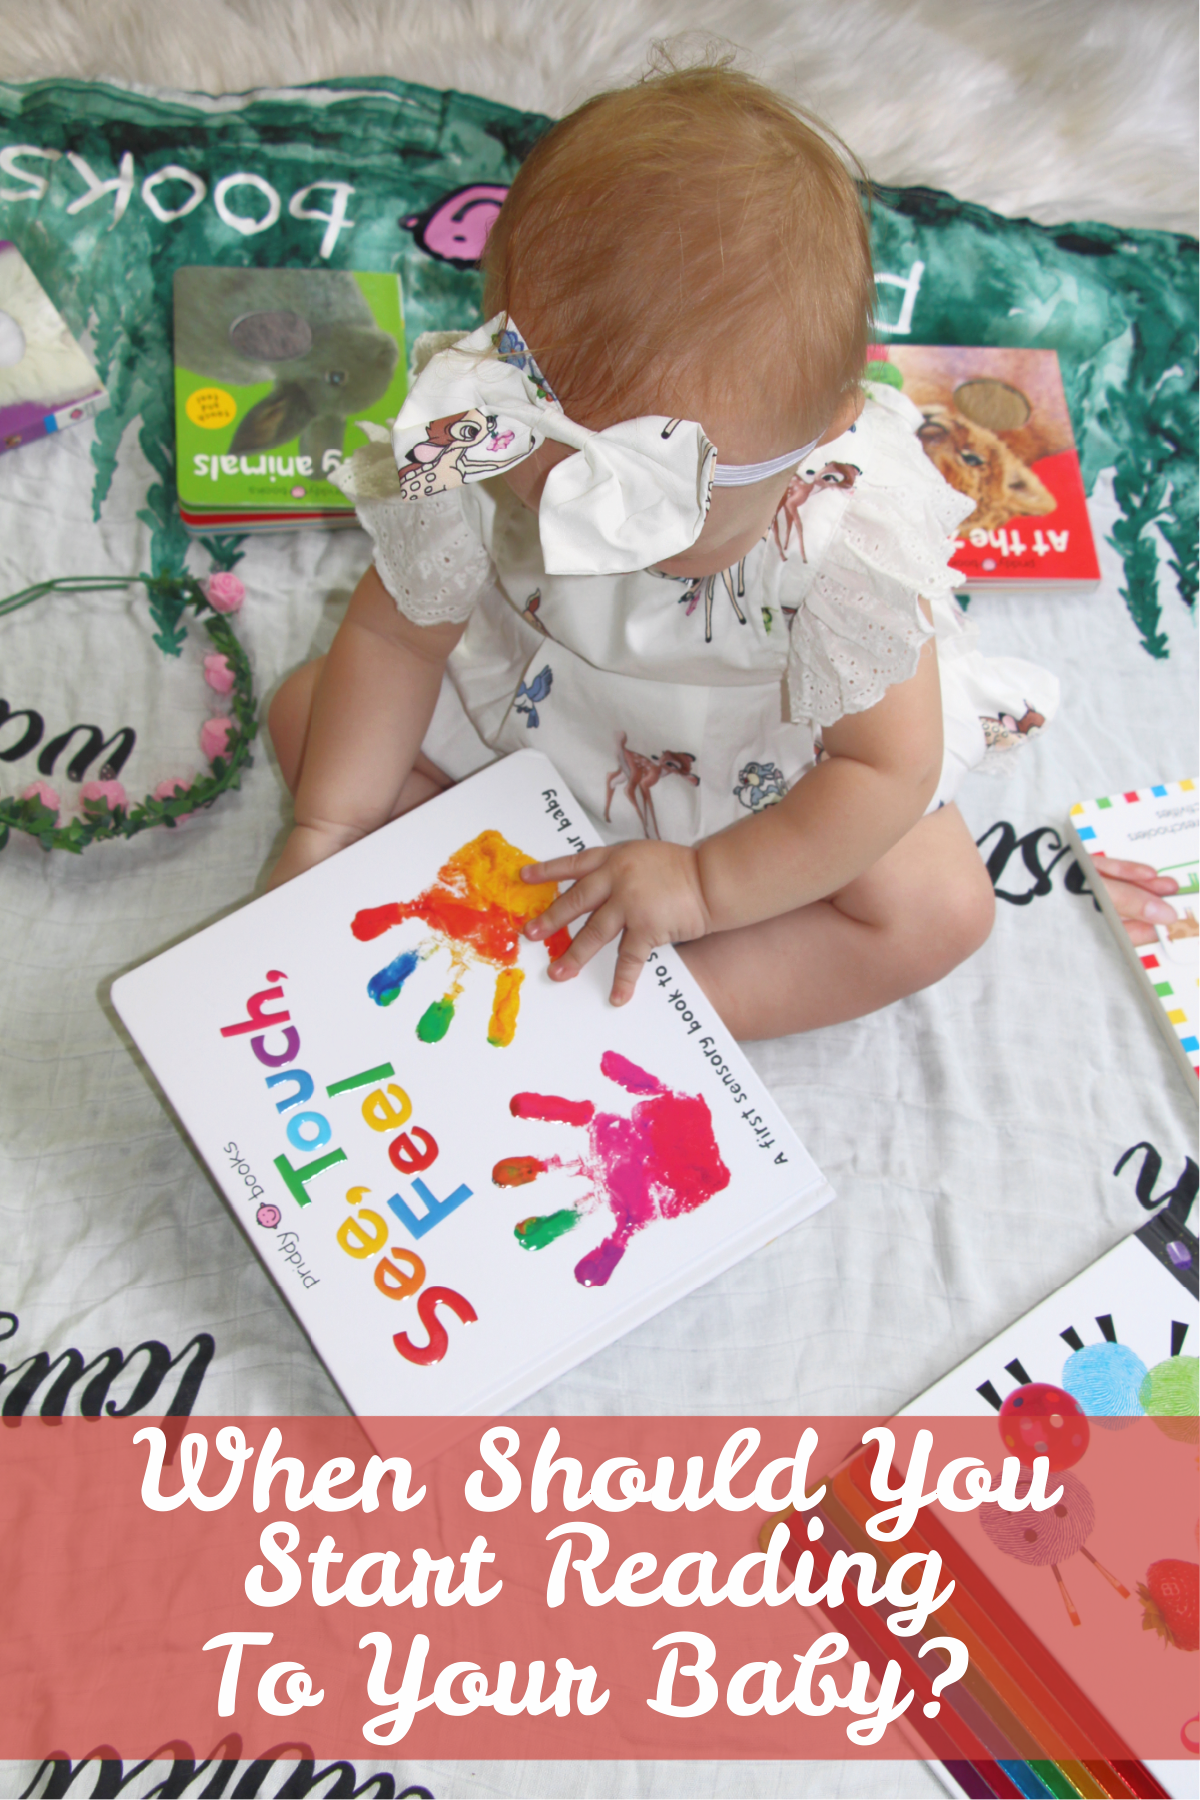 When Should You Start Reading To Your Baby?